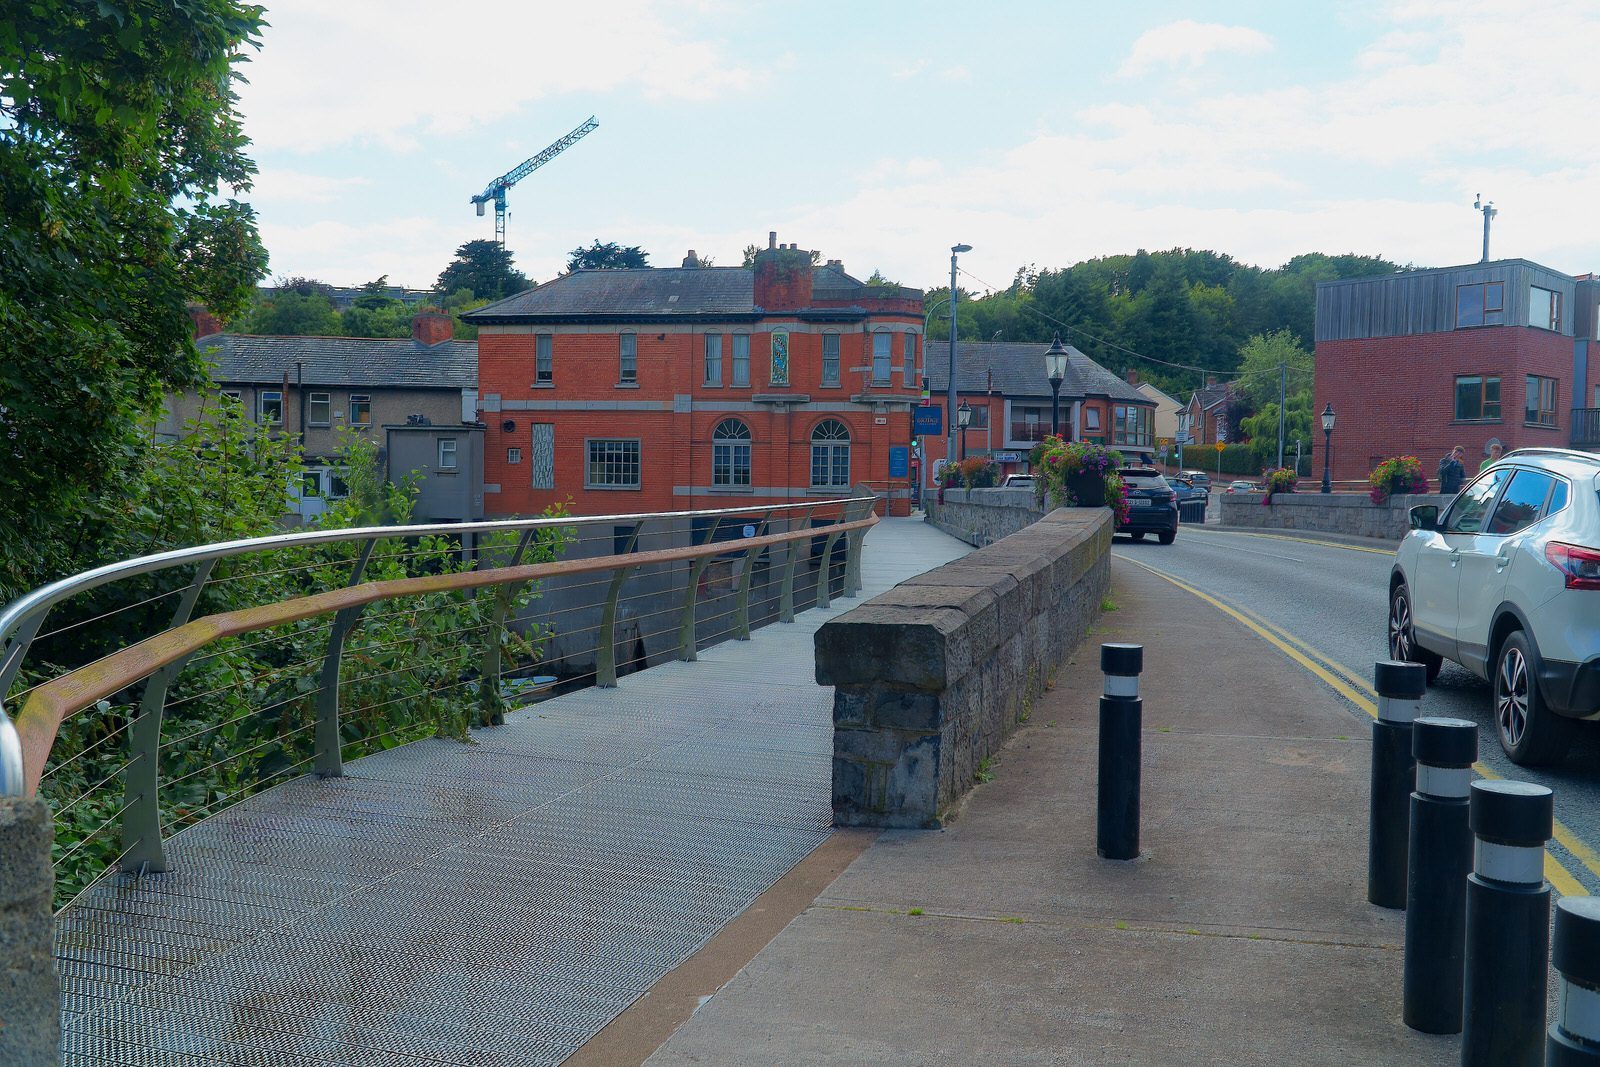 THE ANNA LIVIA BRIDGE IN CHAPELIZOD [IT WAS BUILT IN THE 1660s AND NAMED THE CHAPELIZOD BRIDGE] 003